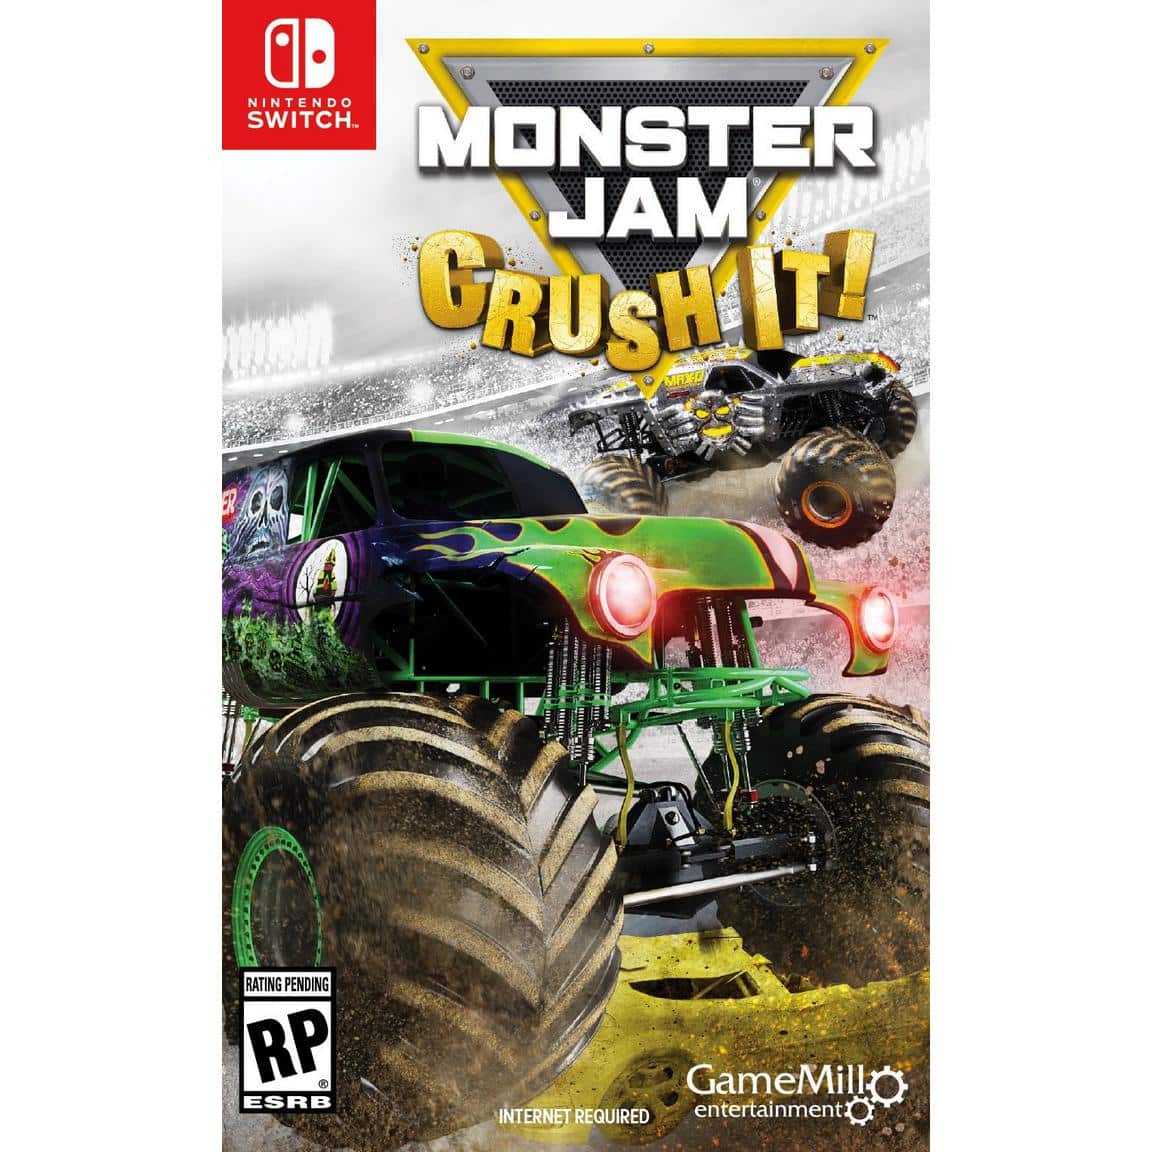 Monster Jam: Crush It! player count stats